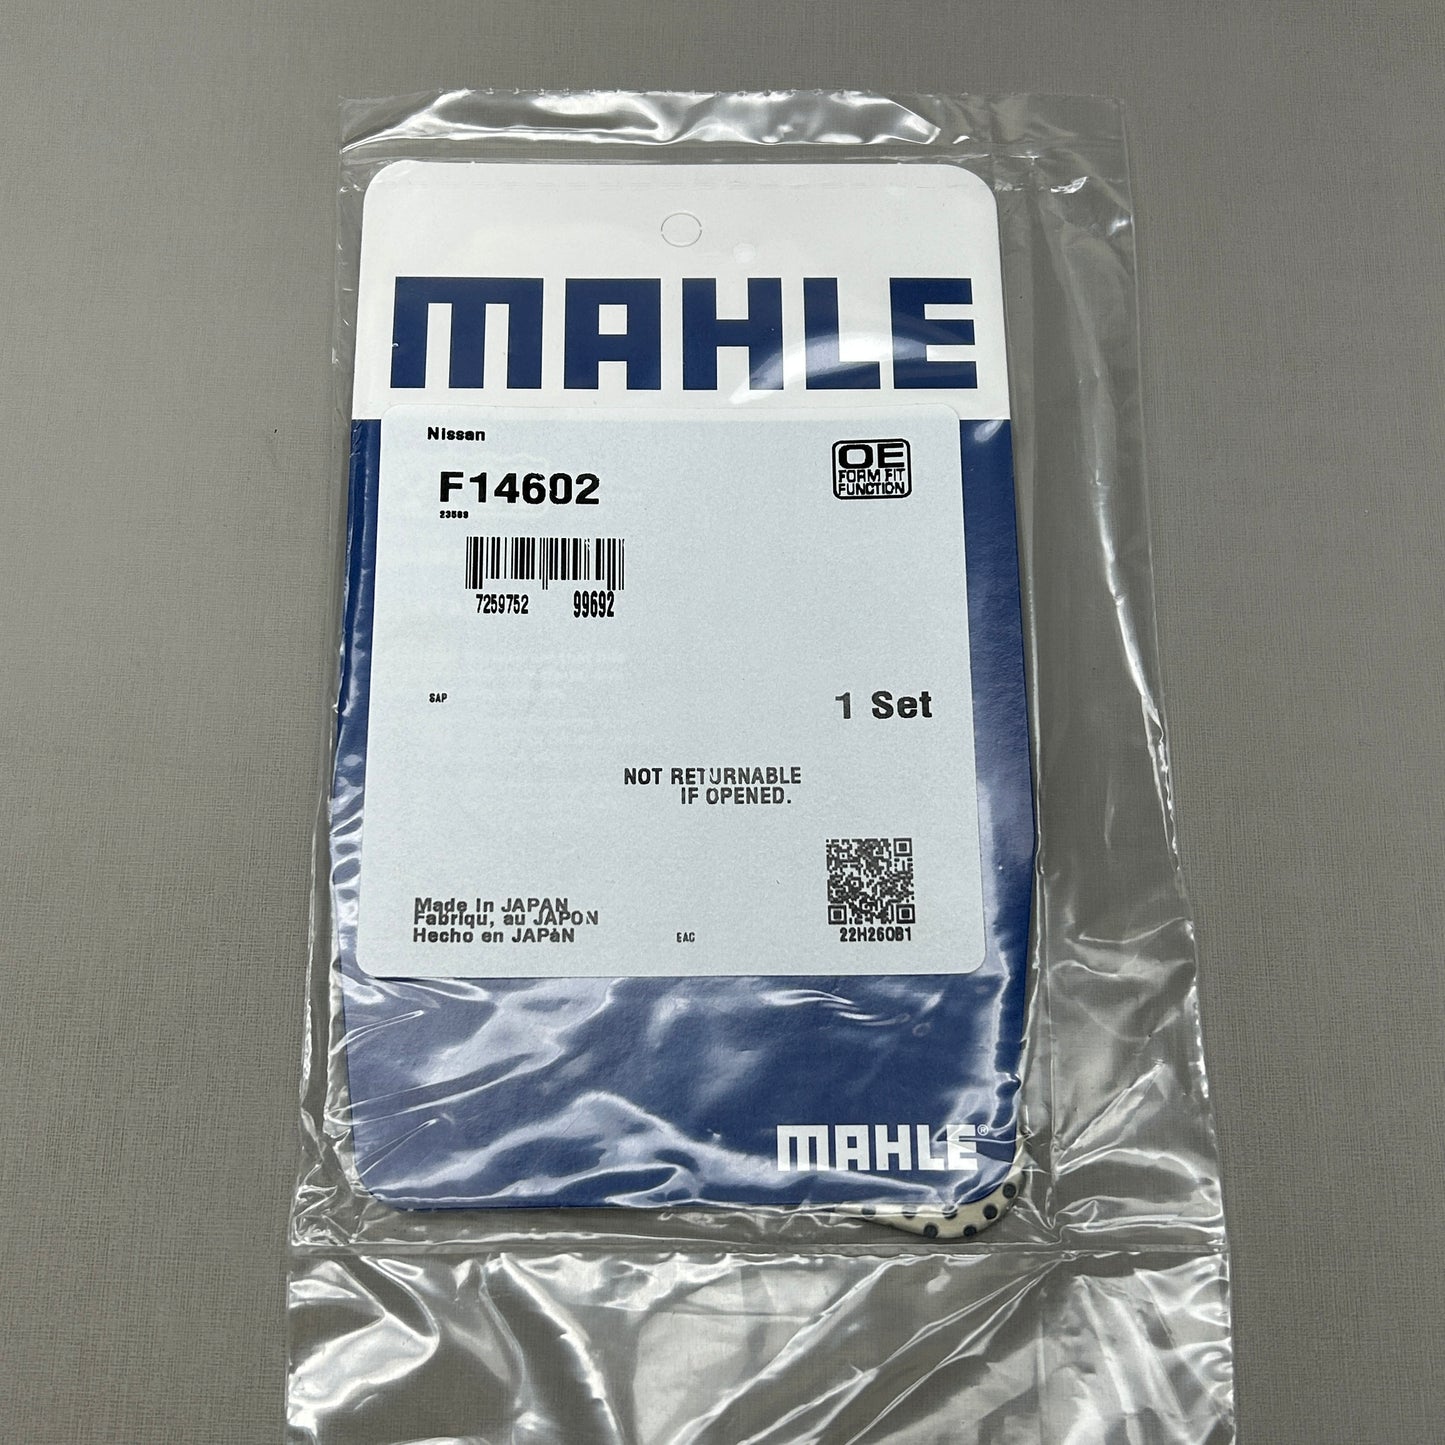 MAHLE Exhaust Pipe Flange Gasket for Nissan F14602 (New)